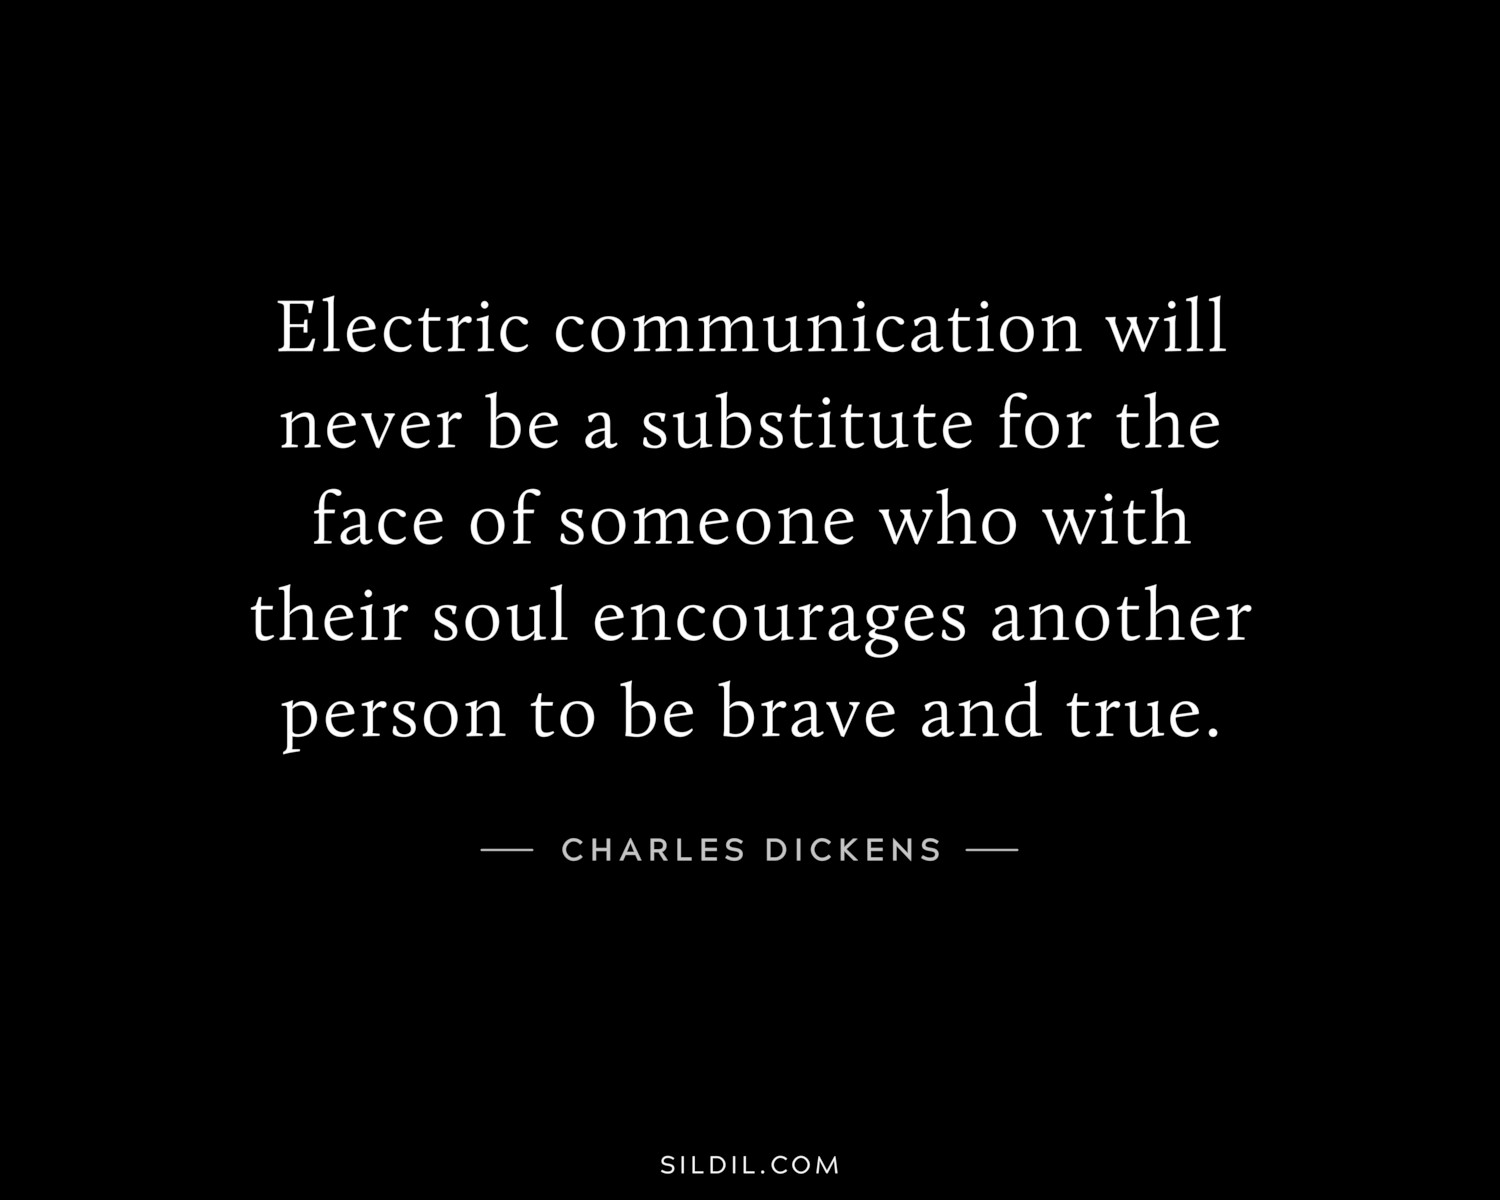 Electric communication will never be a substitute for the face of someone who with their soul encourages another person to be brave and true.